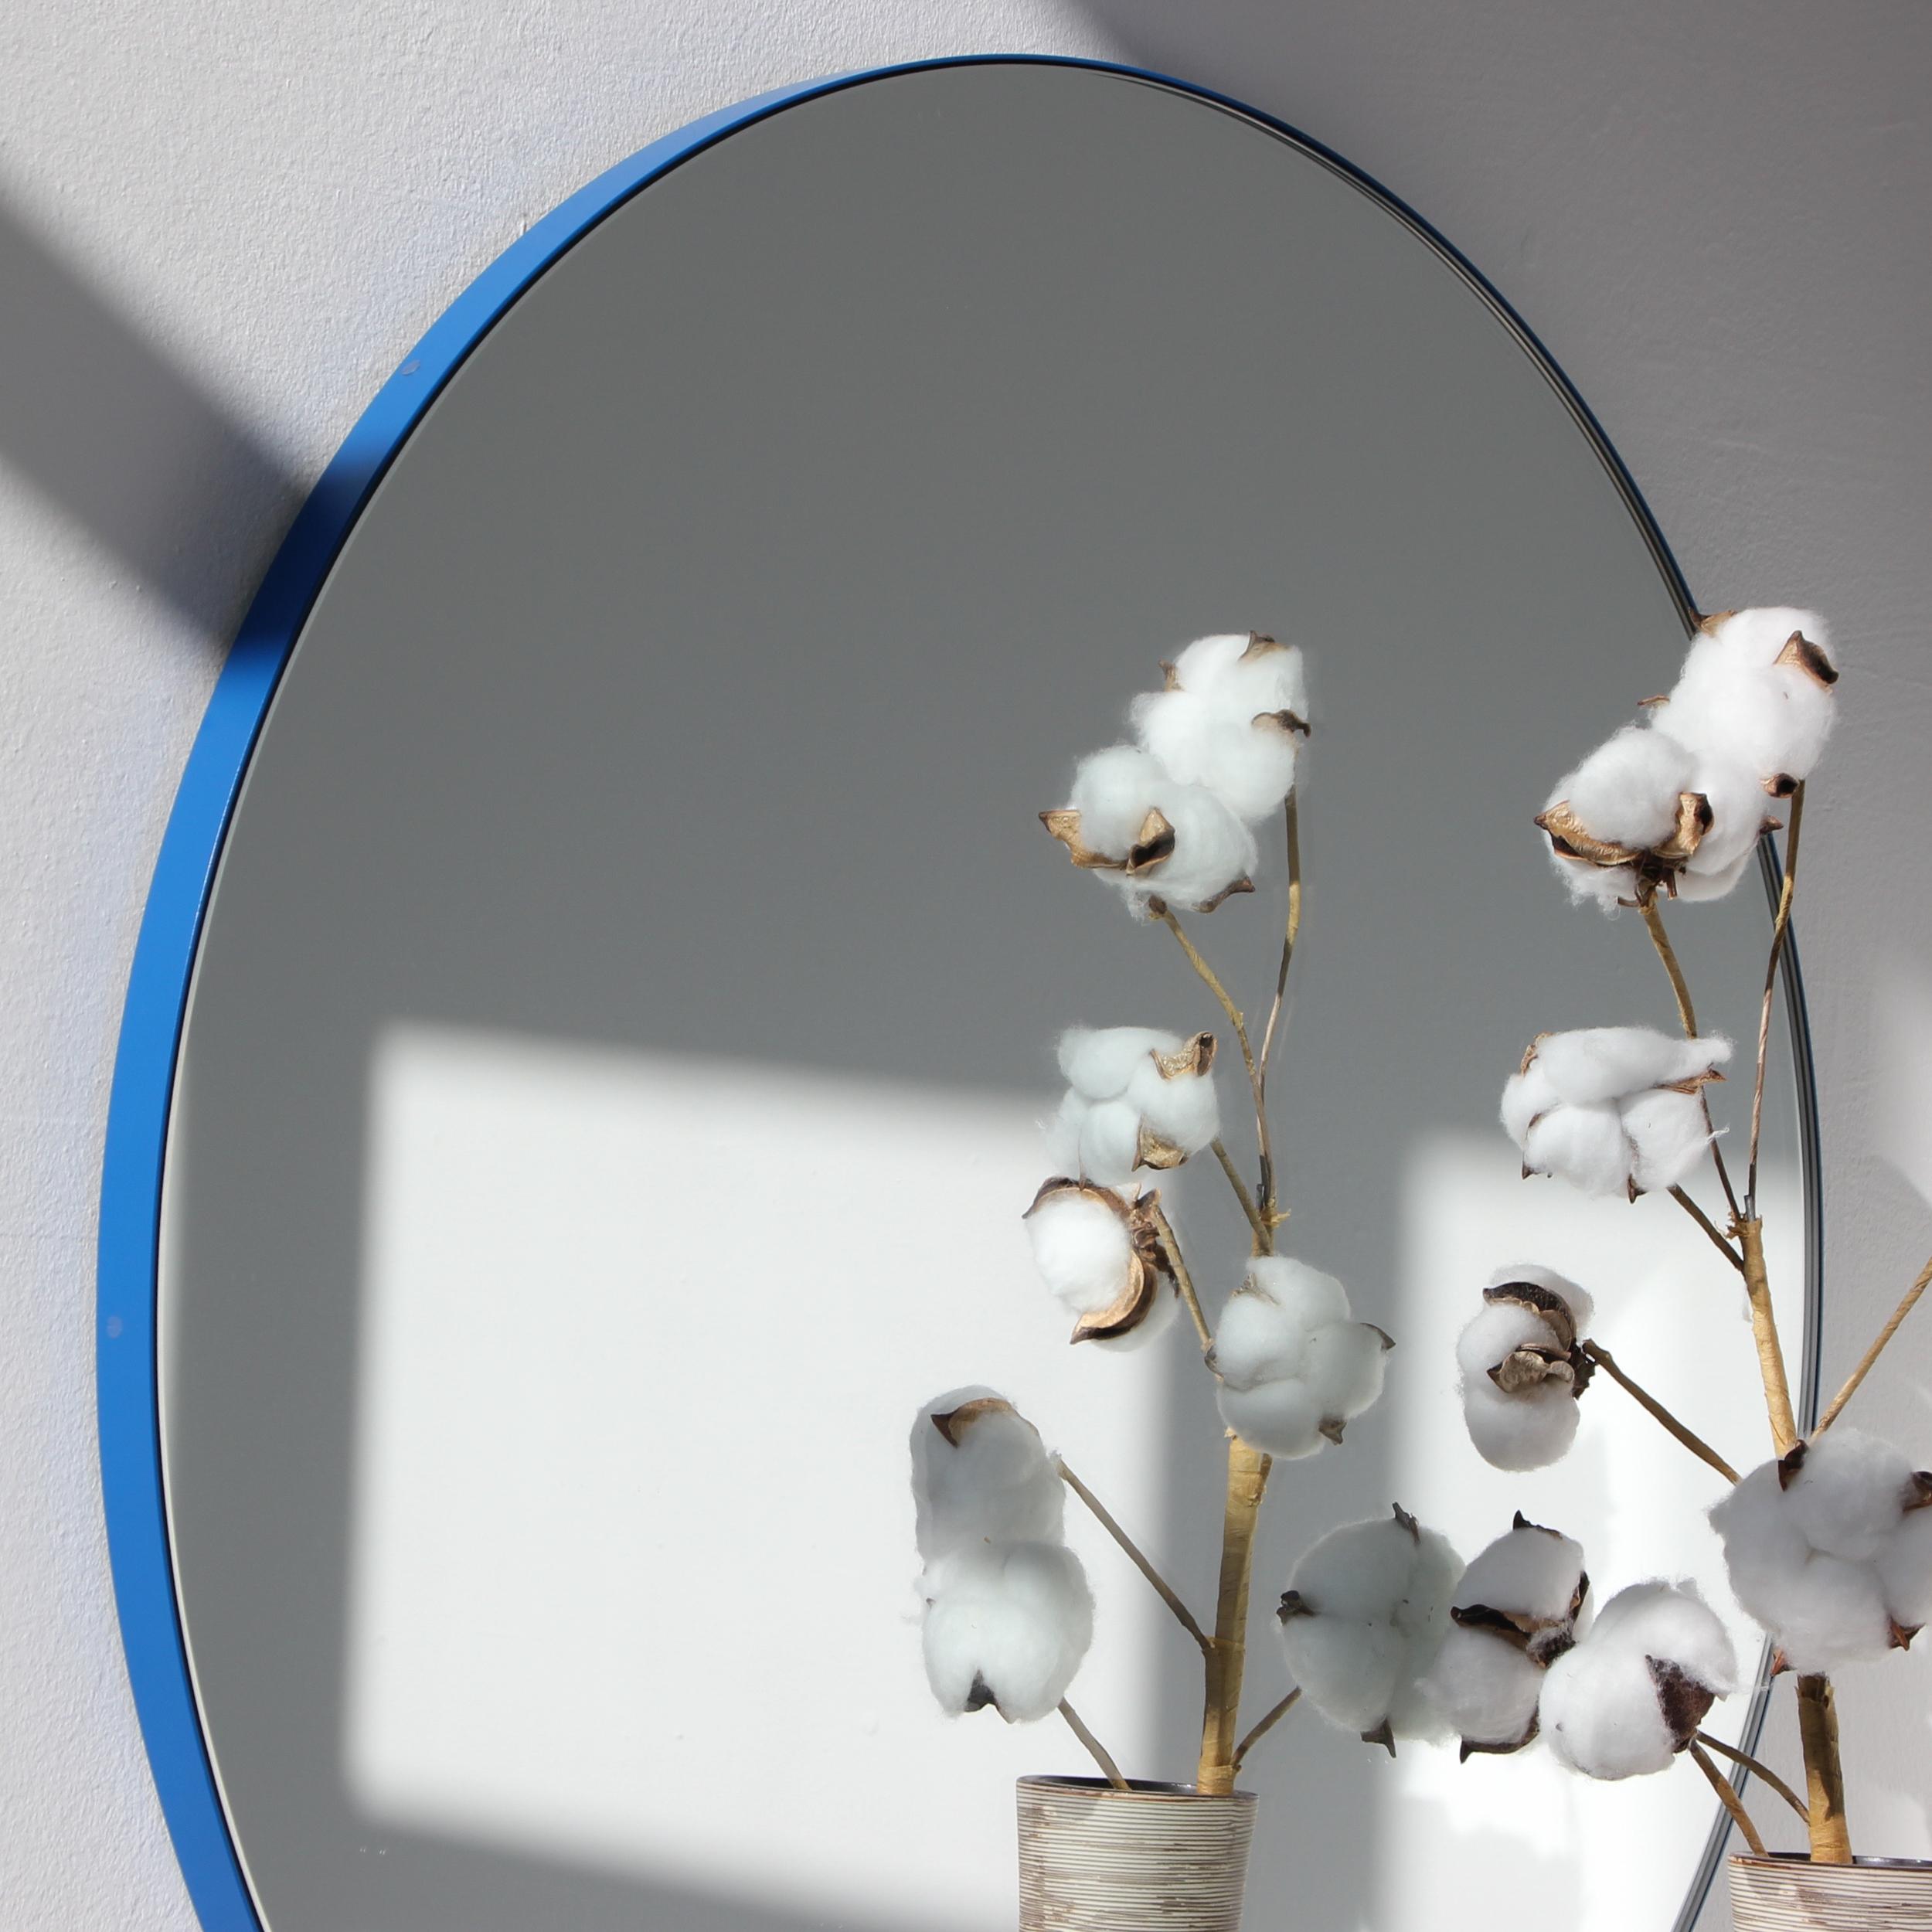 Powder-Coated Orbis Round Modern Mirror with Blue Frame, Large For Sale